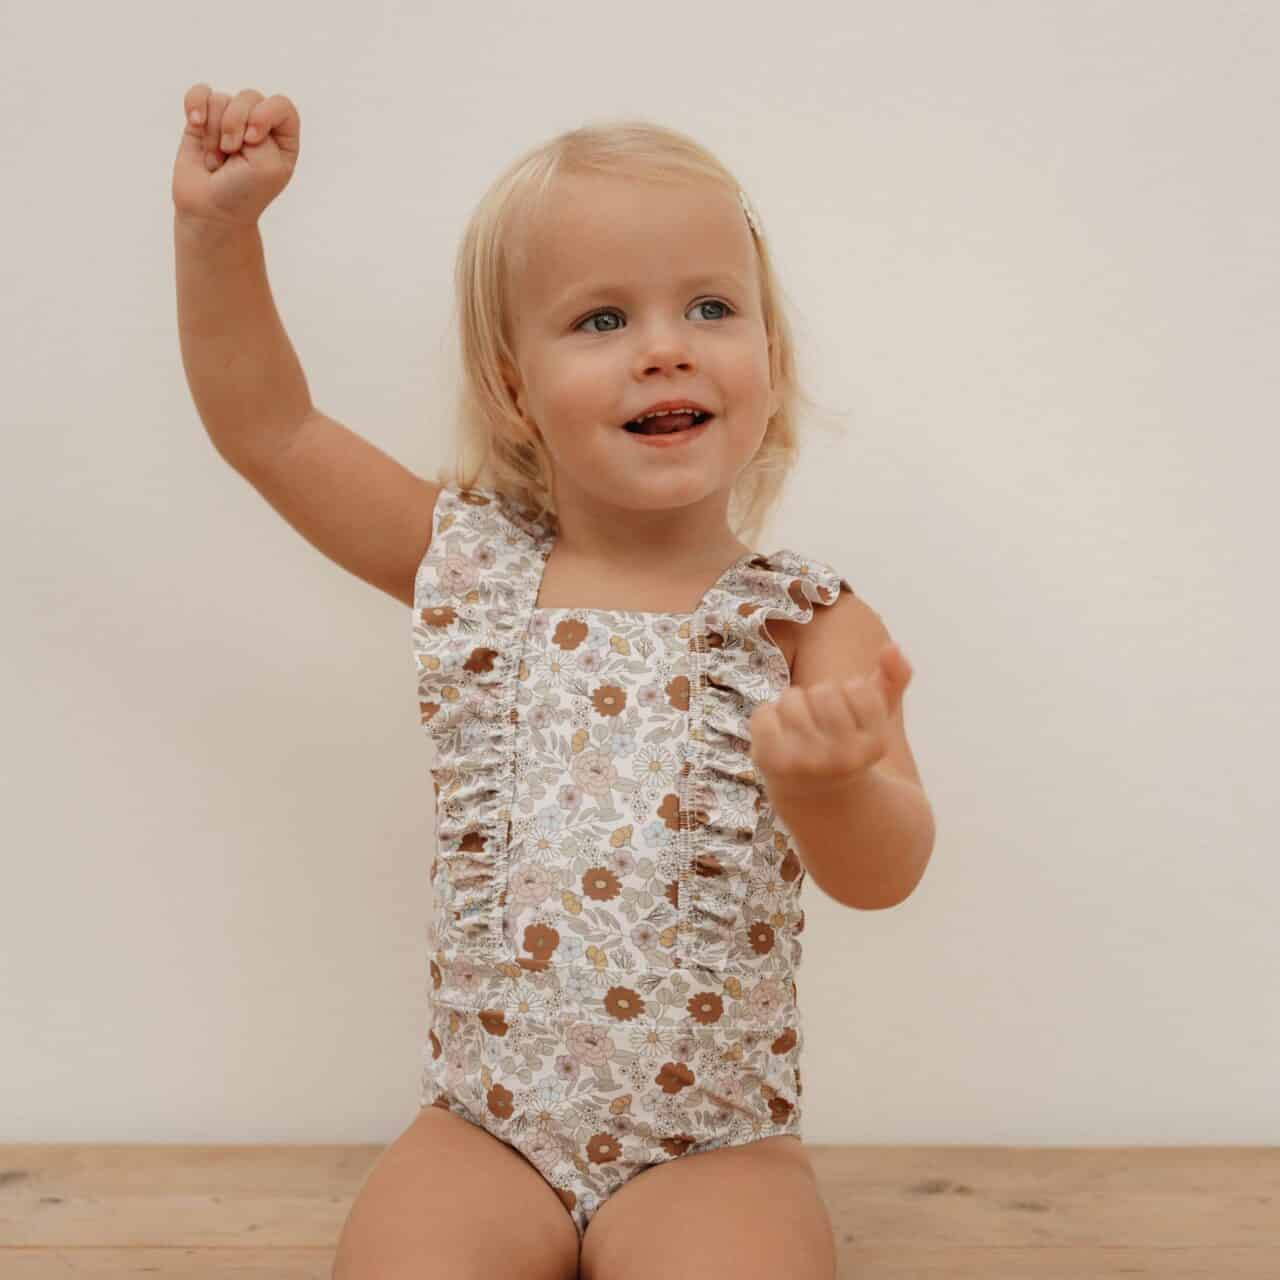 Toddler wearing Little Dutch Vintage Little Flowers ruffled swimsuit, enjoying in a playful pose against a neutral background